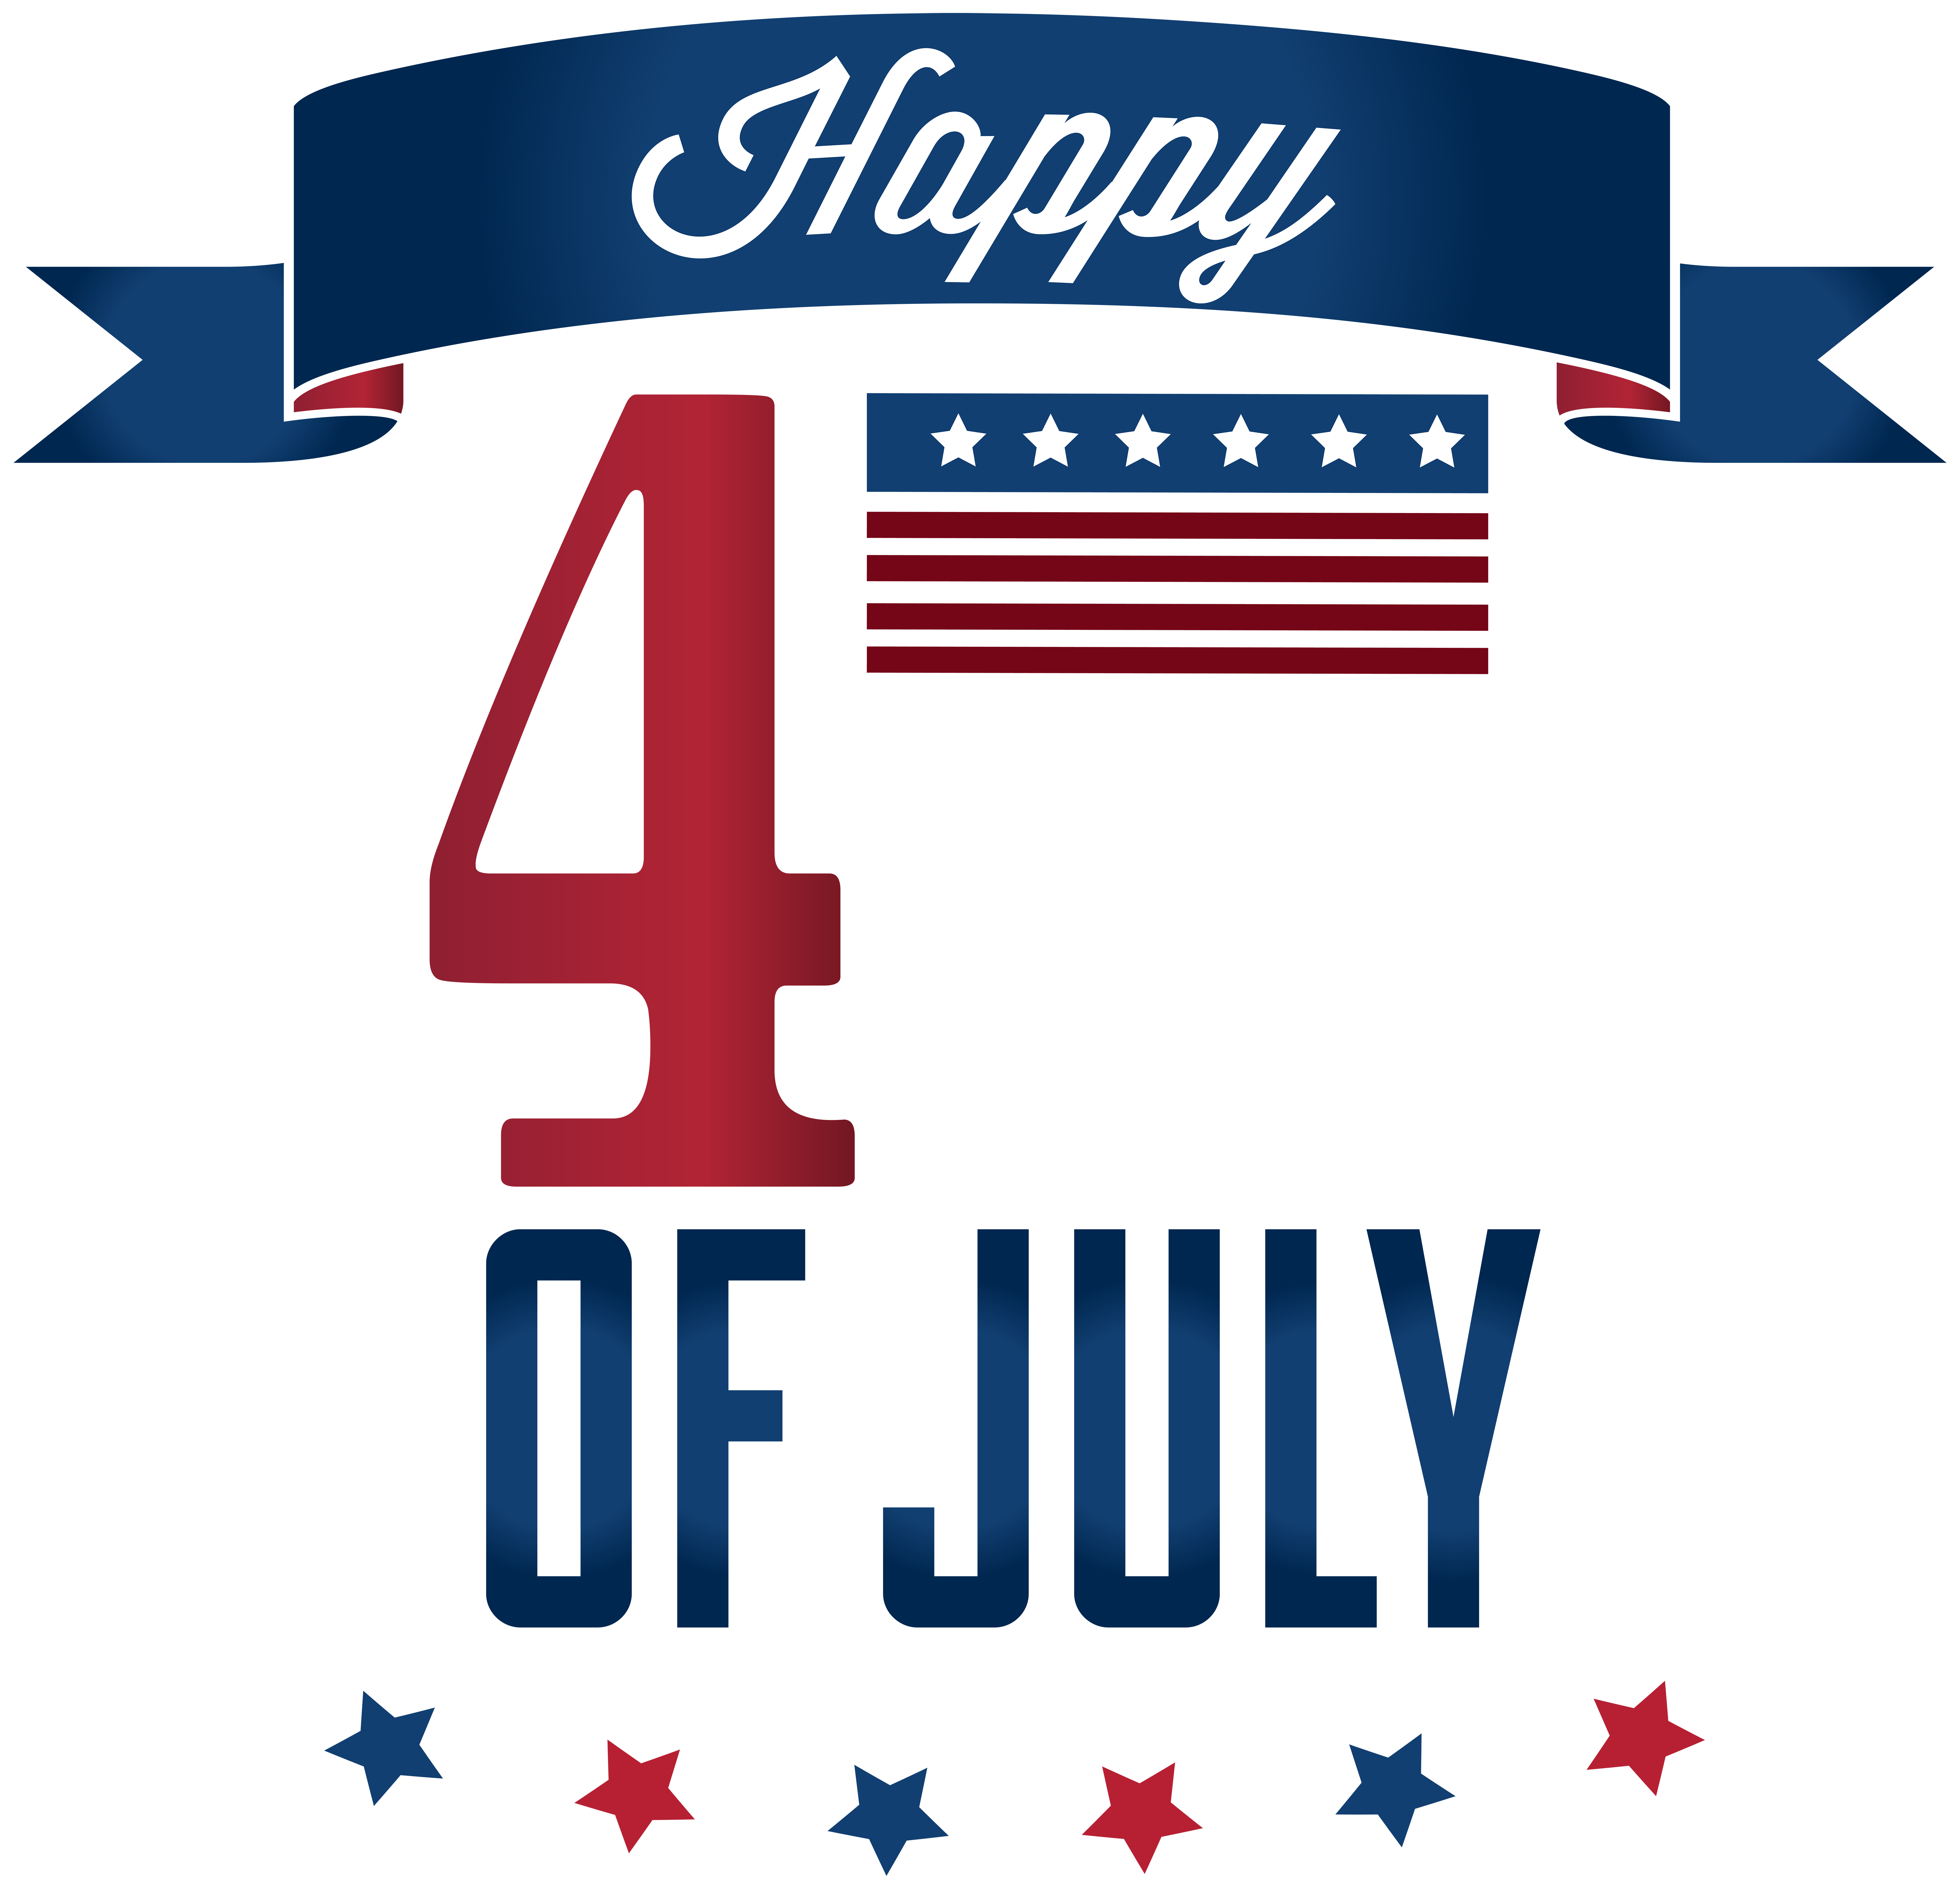 happy 4th of july clipart - photo #32